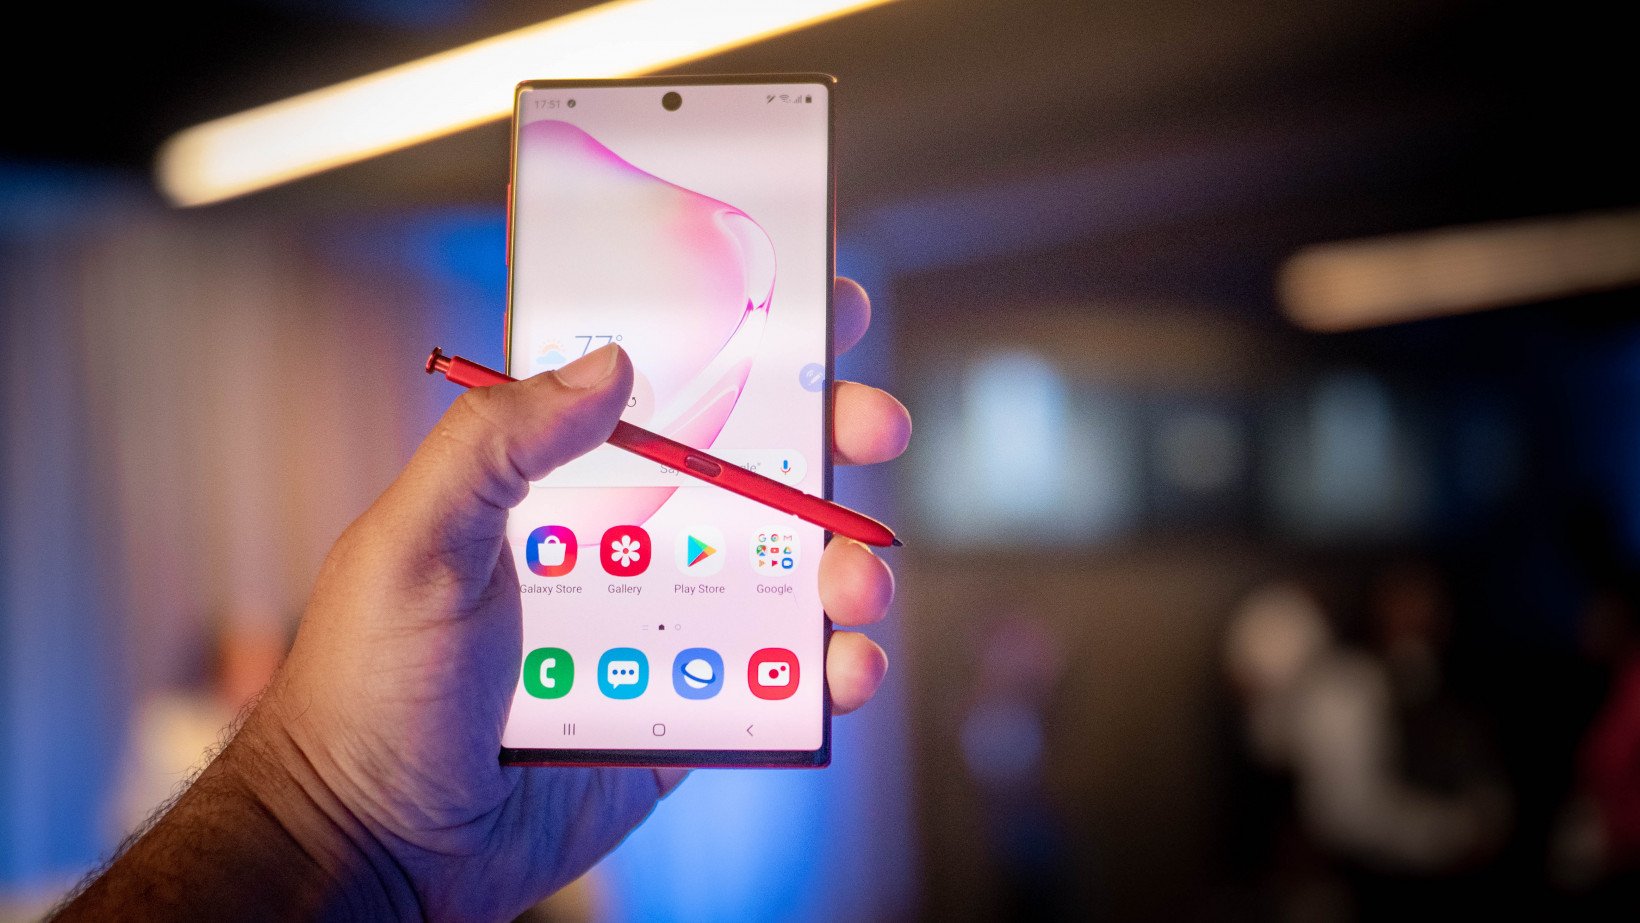 Samsung Note 10 is the Best Phone for Trading in 2019 Due to it's large screen and battery life